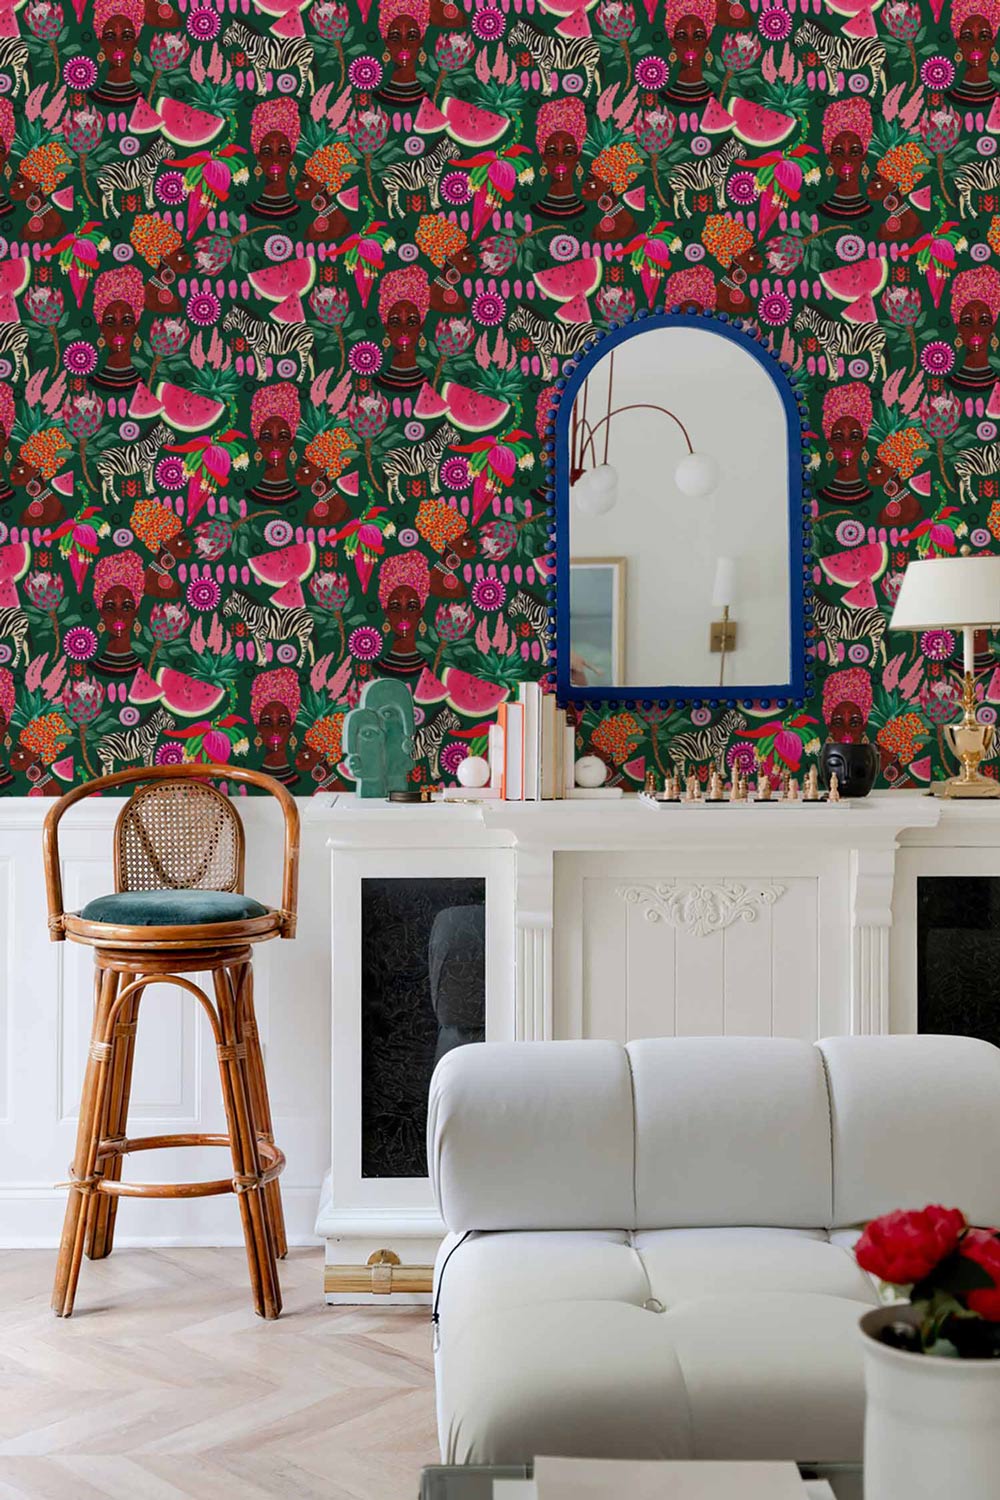 Gardens of Africa wallpaper design as accent wall for living room interior